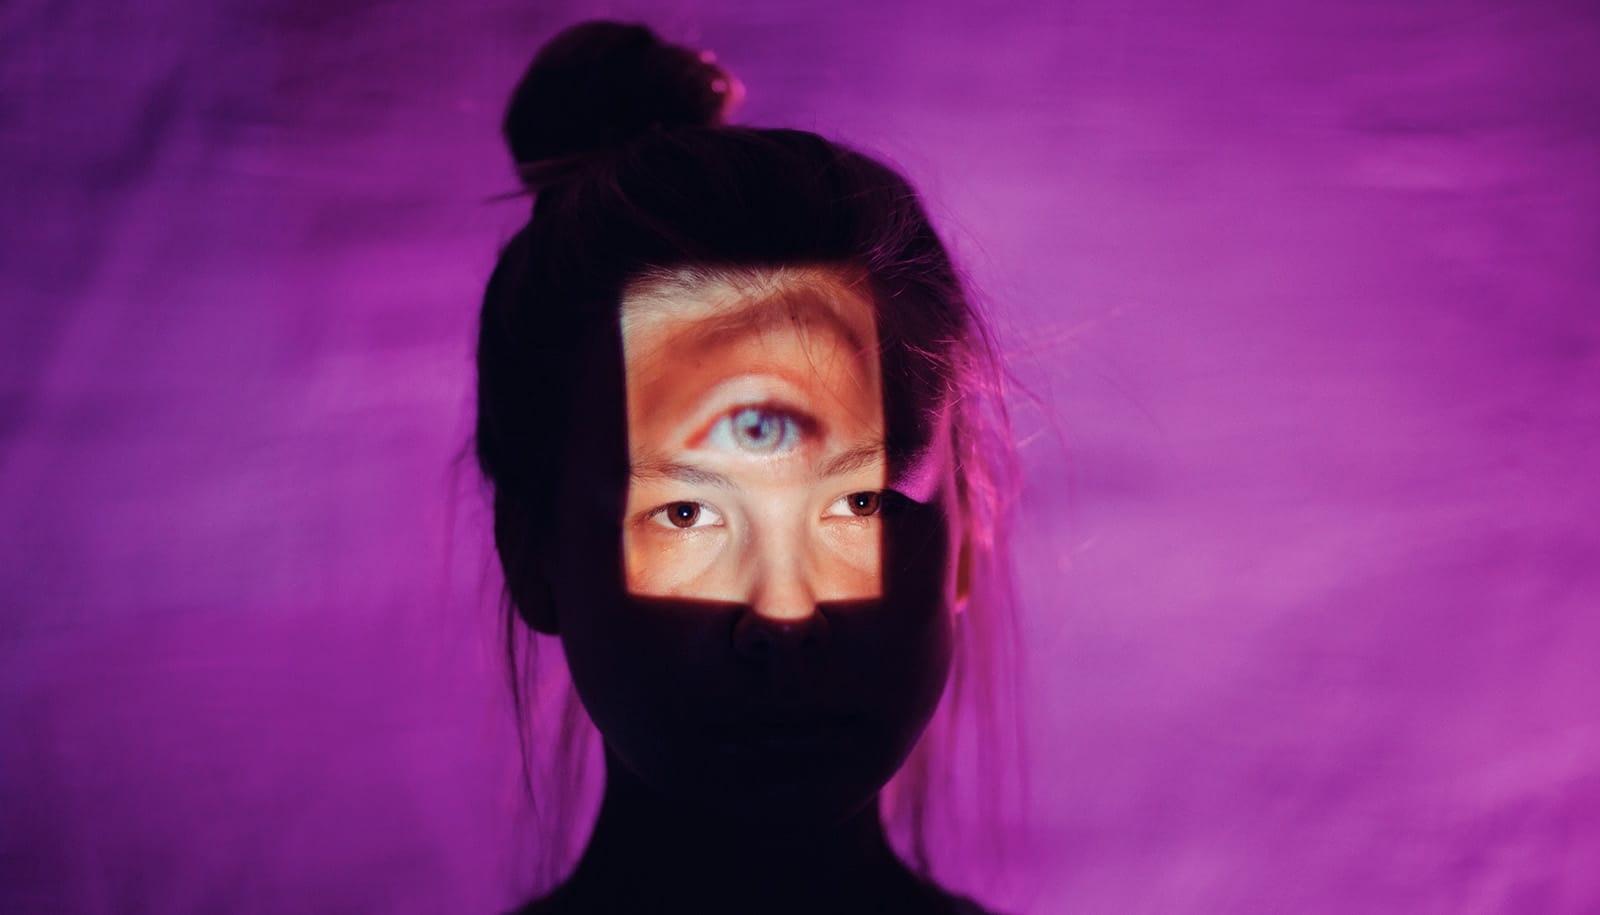 silhouette of face against purple. Rectangle of light on face shows two eyes plus another on the forehead